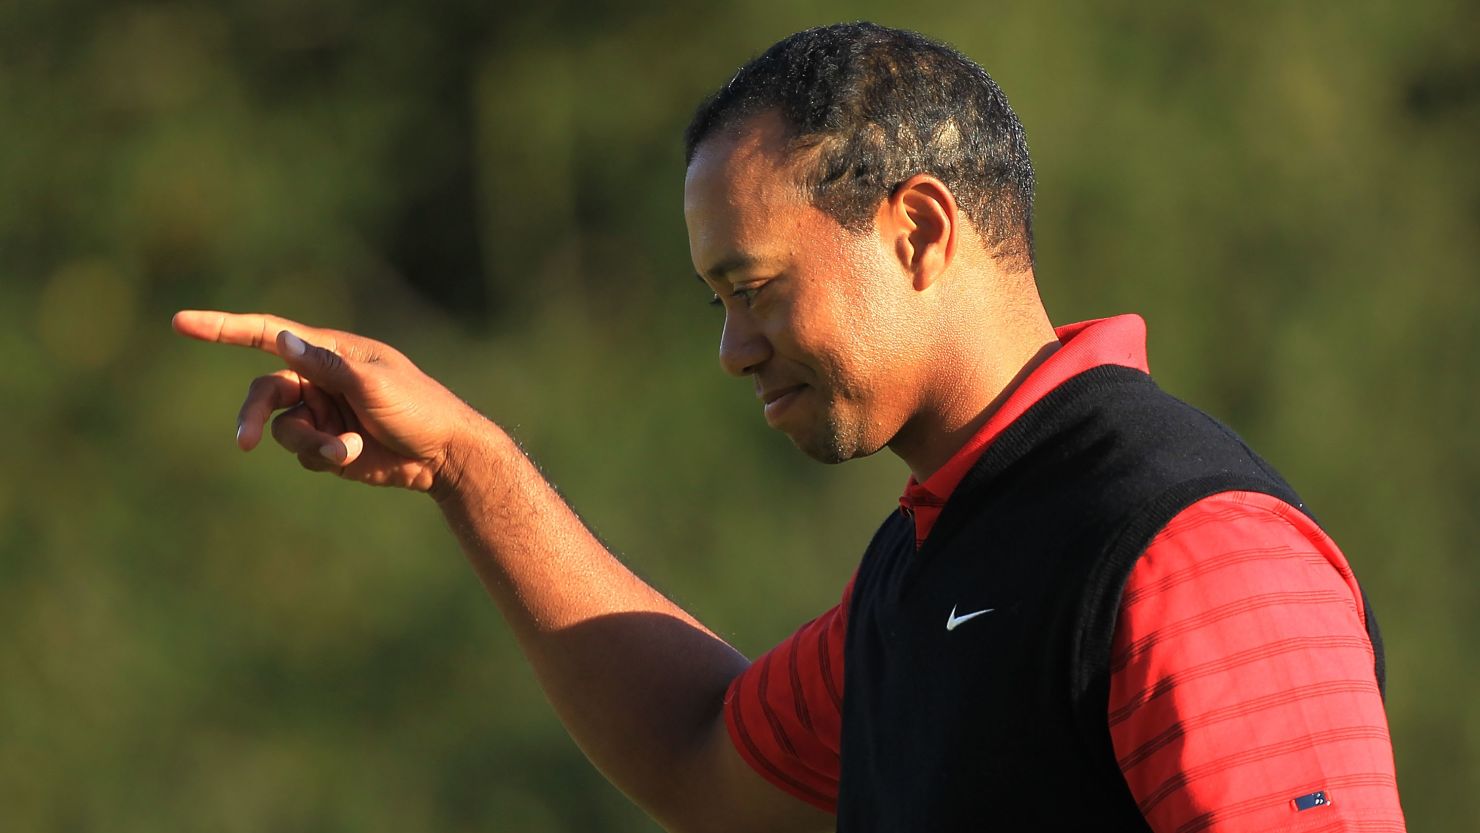 Tiger Woods will play his first PGA Tour event in 2012 at the Pebble Beach Pro-Am on Feb 9.